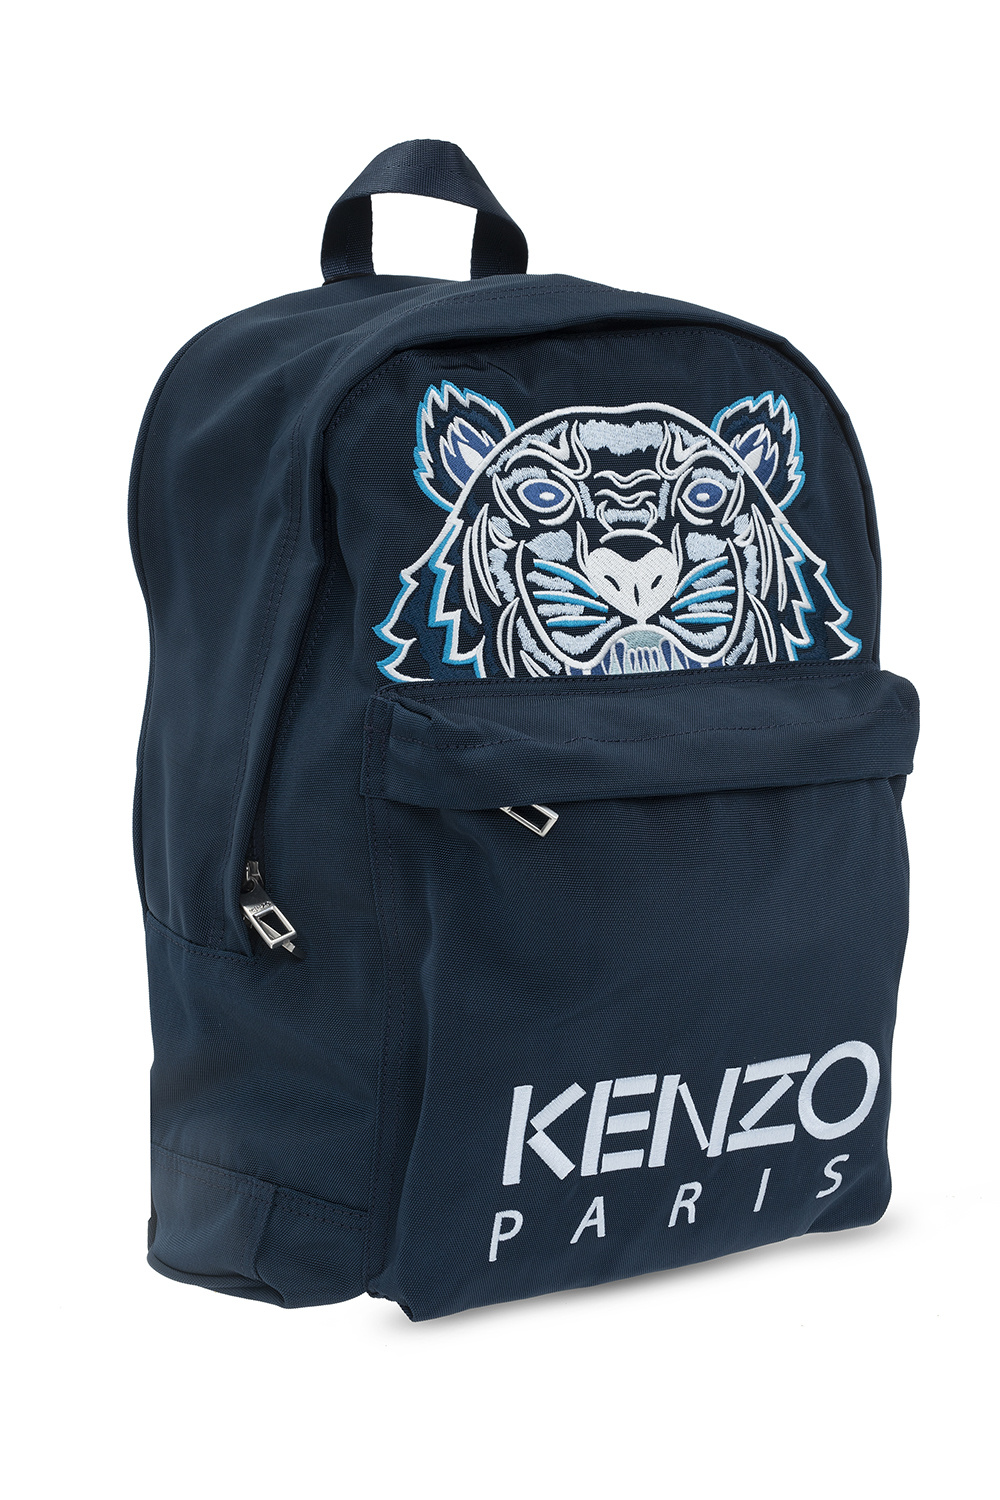 Kenzo since backpack with tiger motif